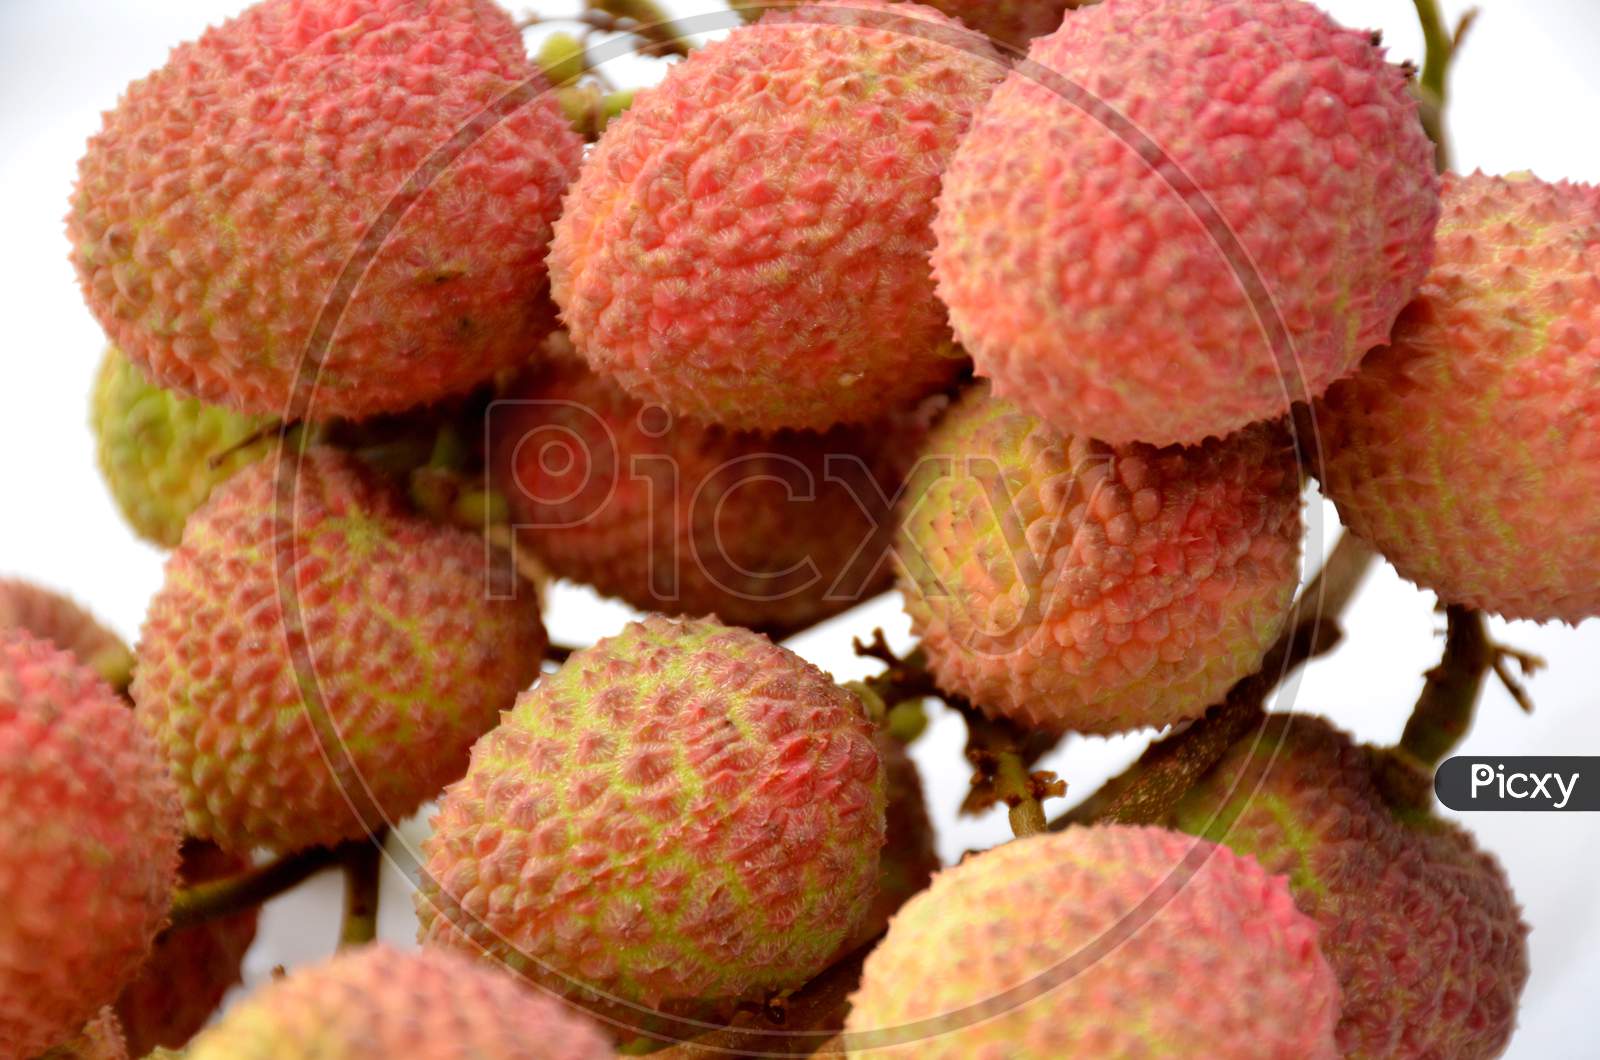 bunch of the red ripe lychee isolated on white background.